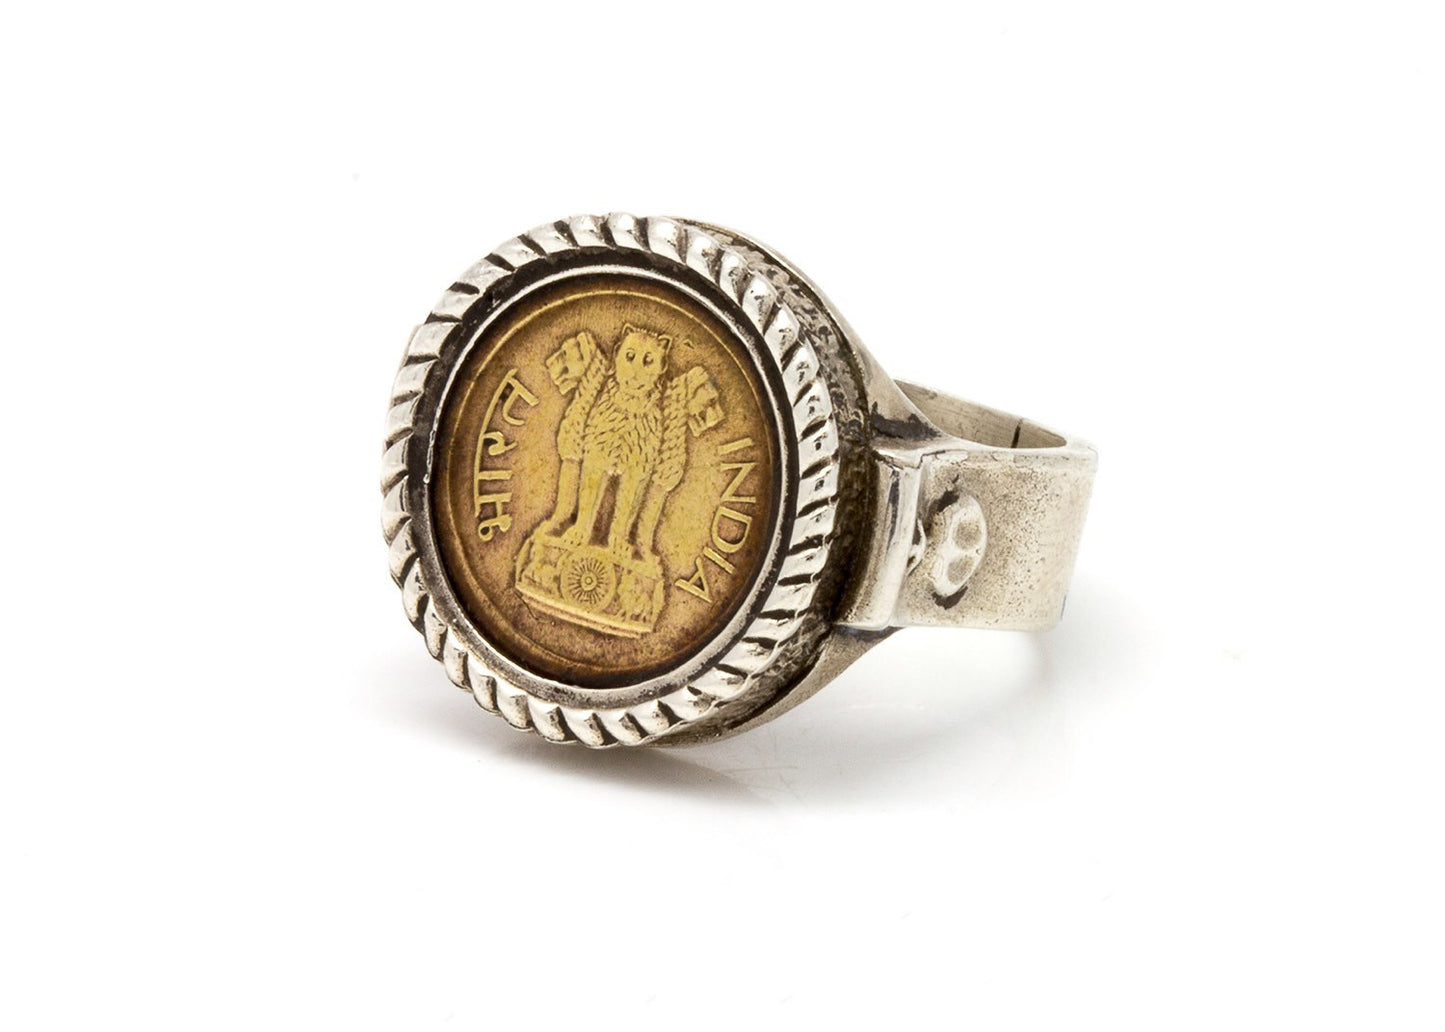 India Coin Ring, Sterling Silver Signet Ring, Men's Ring, Bohemian Ring- With The 1 Naya Paisa